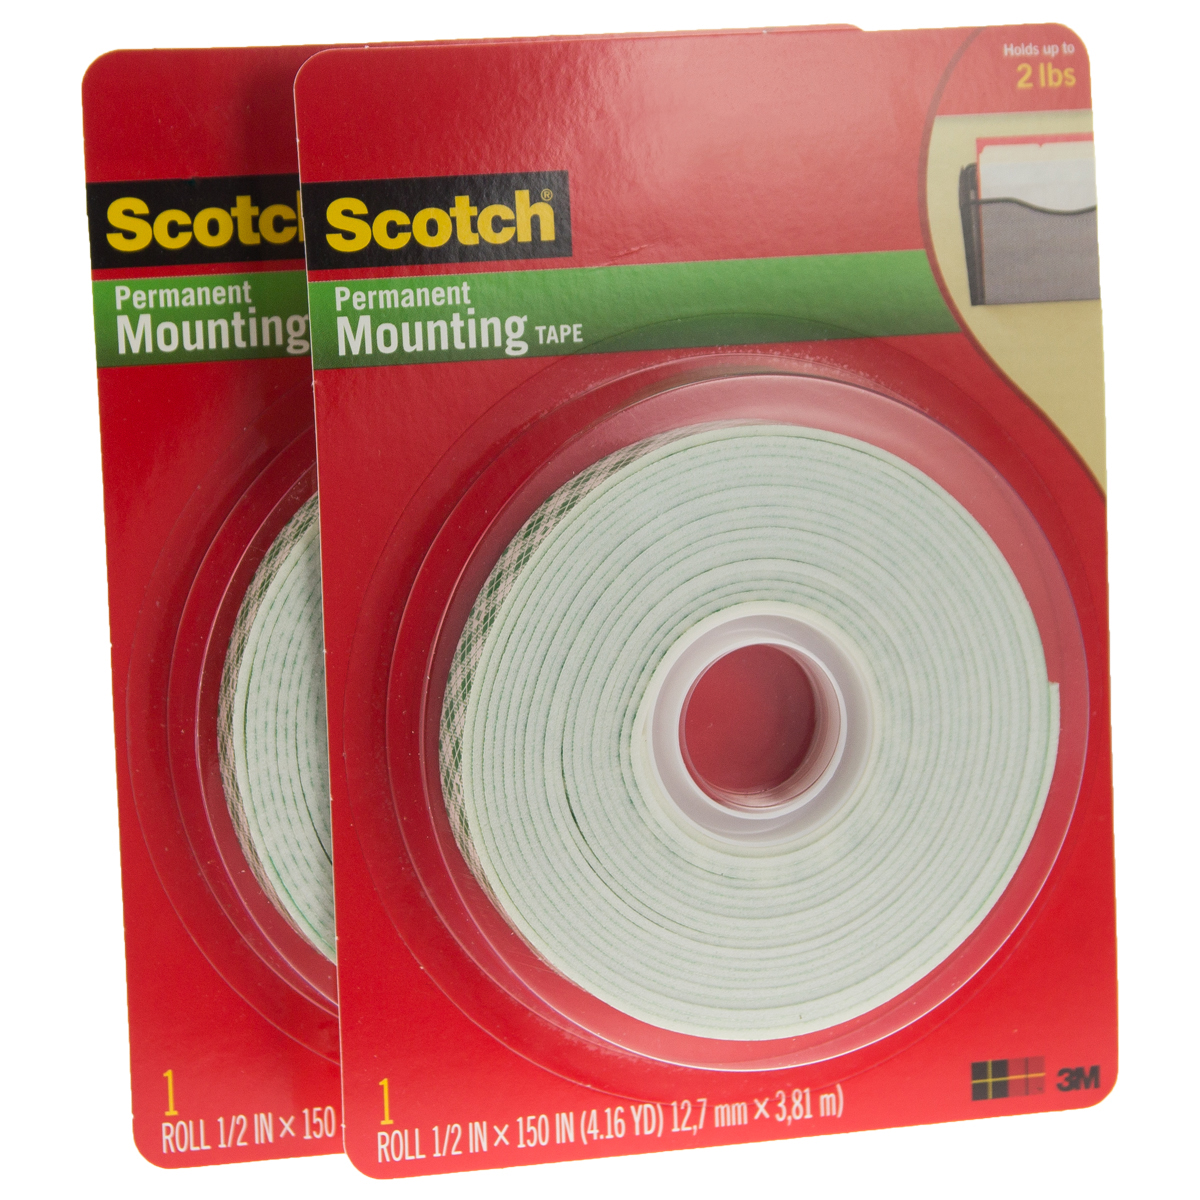 3M Scotch Craft Mounting and Rubber Stamping Foam Tape, 1/2" x 150" - image 2 of 2